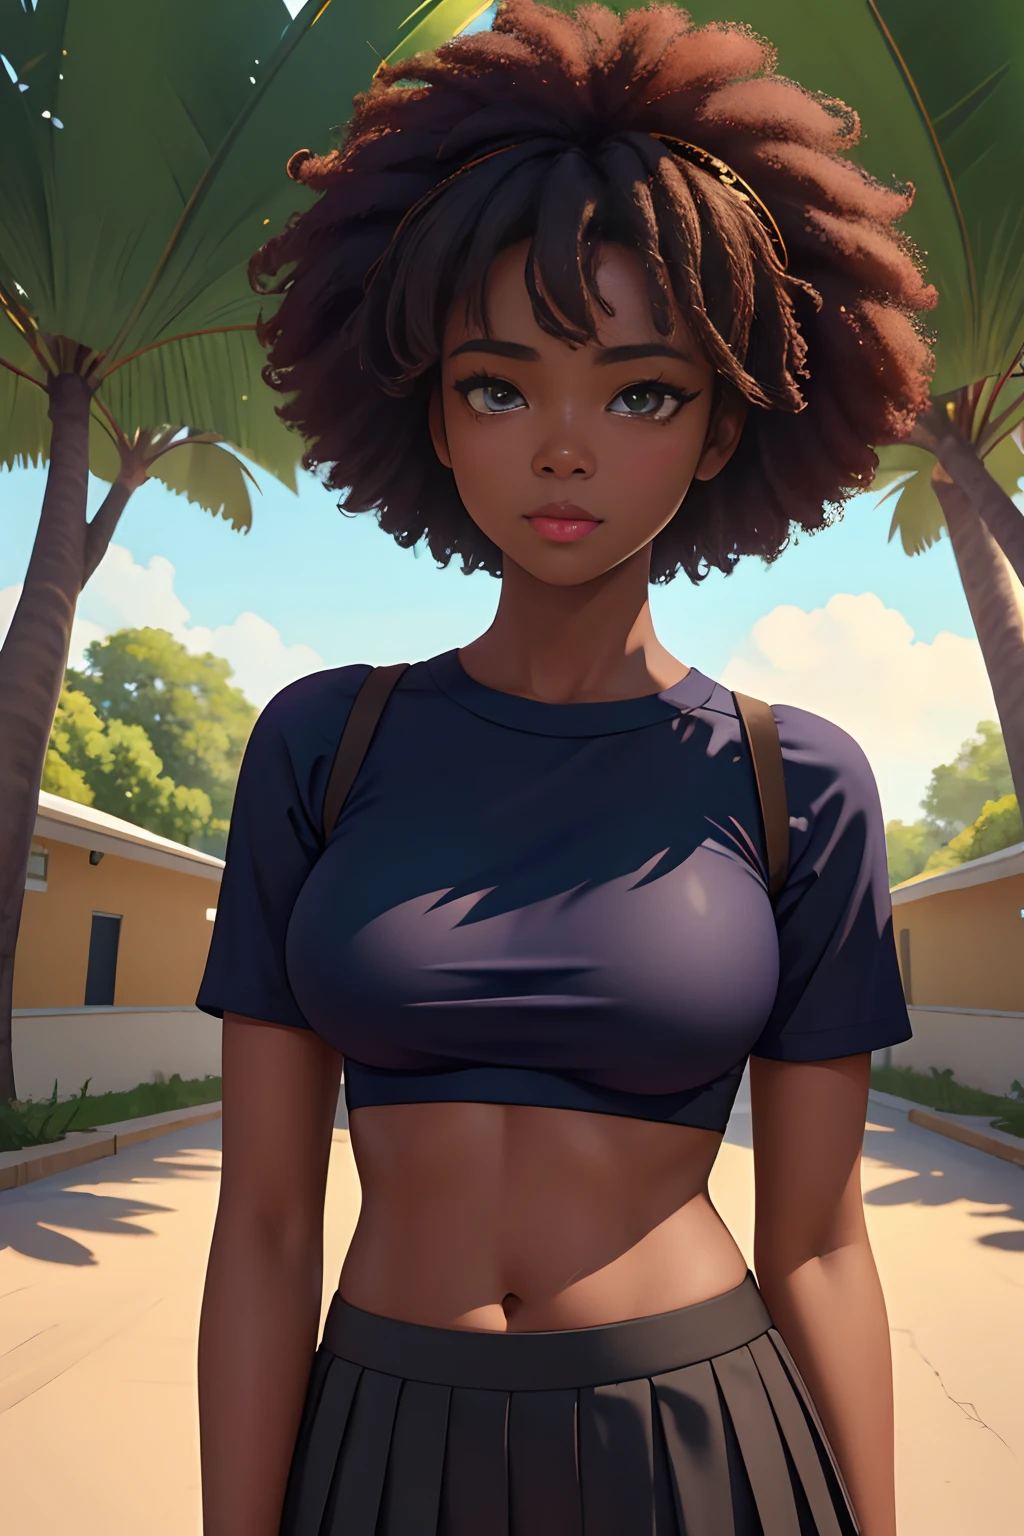 SFW, uploaded on e621, by Pixelsketcher, by Bayard Wu, by Thomas Benjamin Kennington , by Einshelm, solo anthro, ((face portrait)), BREAK, ((mini under boob tee, short skirt)), natural park, ((wearing bra, showing belly button)), ((huge afro)),(detailed Bonifasko lighting), (detailed skin), (detailed deep ebony skin), (dark skin, ebony, deep ebony), (her own arm holding her own head), BREAK, ((mini under boob tee, short skirt)), ((natural park)), ((facing viewer)), (cinematic lighting), ((detailed background)), ((face portrait view)), (((portrait view))), (half body shadow), [backlighting], [crepuscular ray], [detailed ambient light], [gray natural lighting], [ambient light], (higher detail), [explict content], [sharp focus], (questionable content), (shaded), ((masterpiece), her own arms holding her own head, medium breasts, african girl, African face, African Art, African Art, Commission for High Res, African Art, Art,Sakimichan beautiful, masterpiece, medium breasts, best quality, detailed image, bright colors, detailed face, perfect lighting, perfect shadows, perfect eyes, girl focus, eyes, flawless face, medium breasts, face focus, (huge afro)) African, African girl, dark skin, deep ebony woman, ebony nose, sexy mouth, gaze at the viewer, eyes, 1girl, solo, (masterpiece), (best quality), (illustration), (cinematic lighting), detailed dark skin, balanced coloring, global illumination, ray tracing, good lighting, deep ebony, African, showing breasts, cleavage, looking at viewer, seductive look, SFW